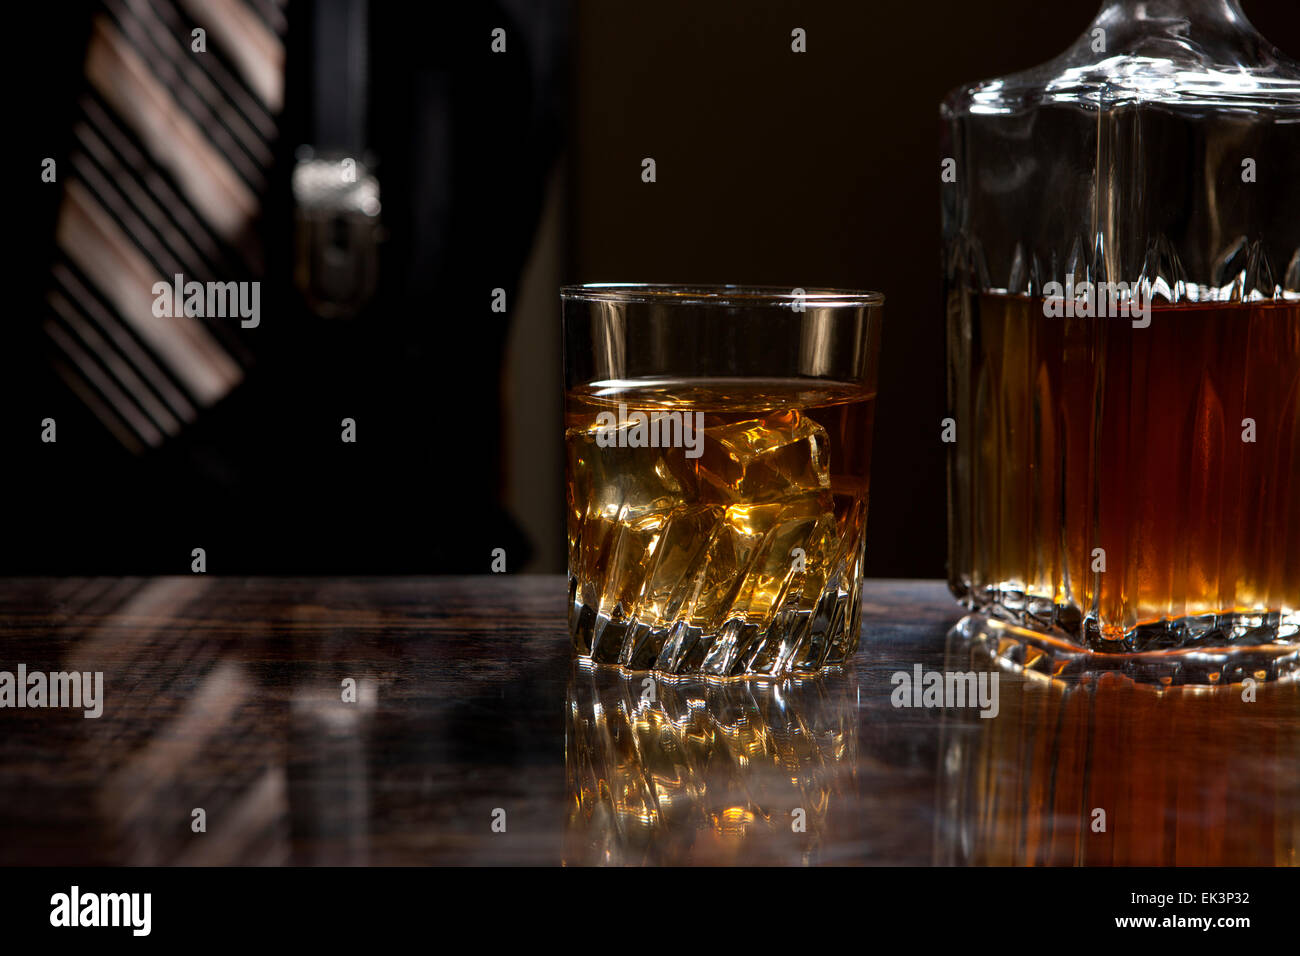 A glass of whiskey on the rocks next to a bottle at home. Stock Photo